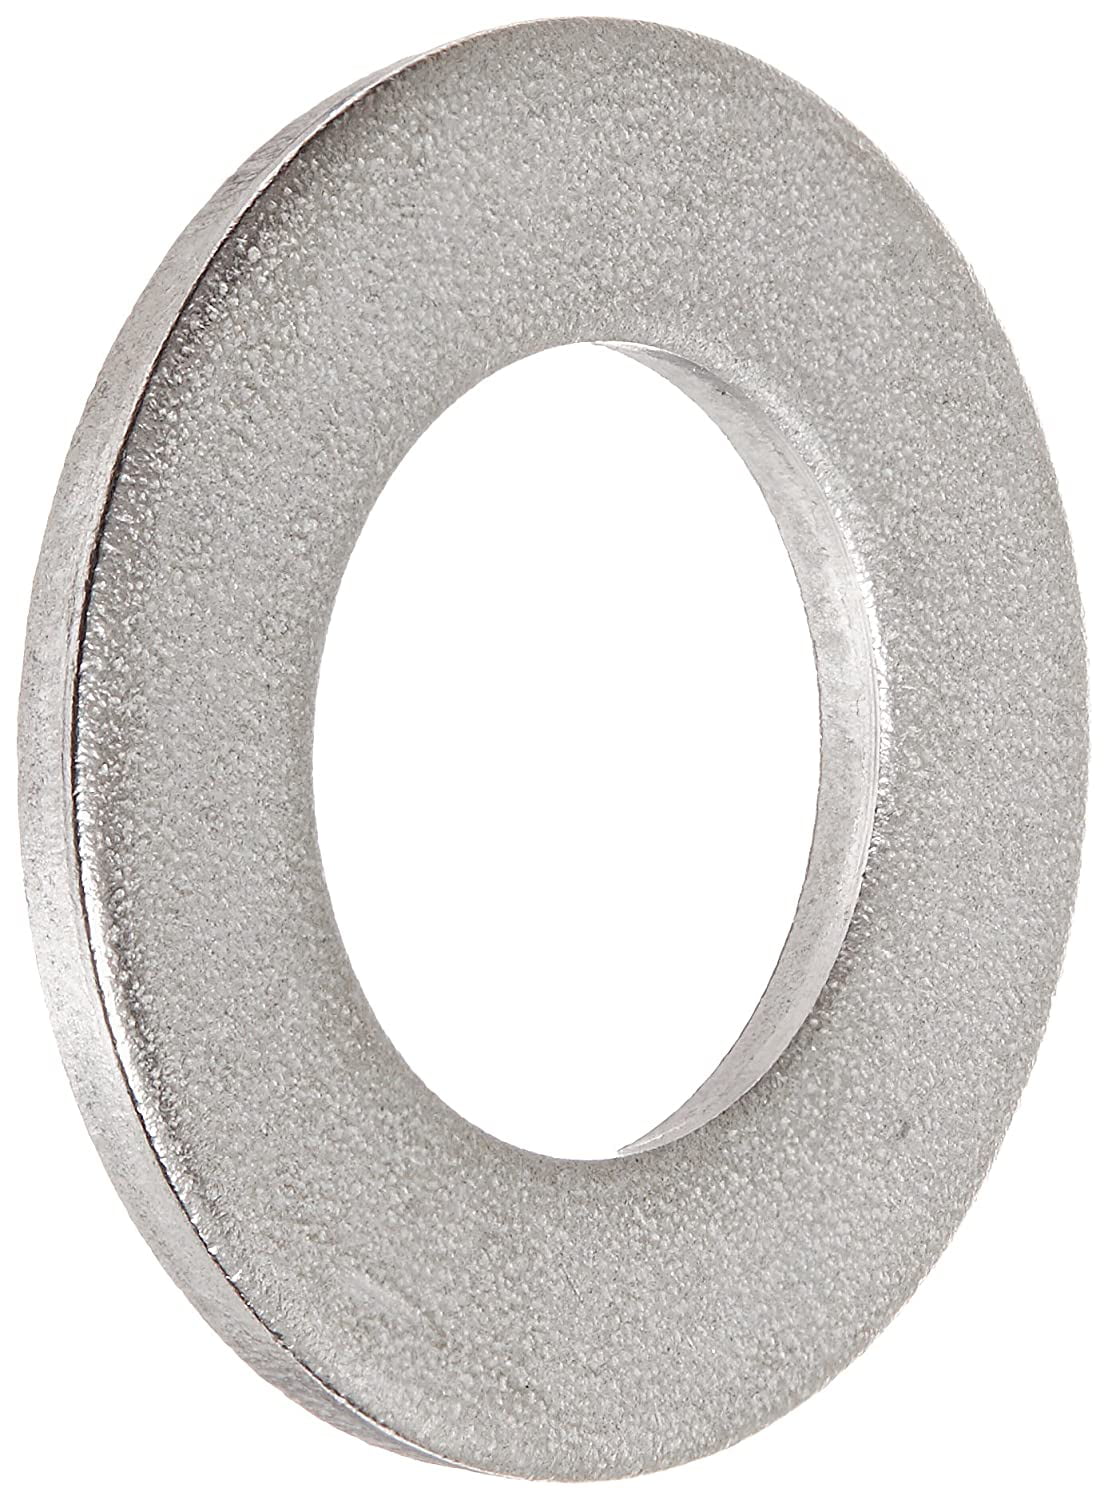 Phillips Drive Steel Machine Screw Pan Head Internal-Tooth Lock Washer 7/16 Length Fully Threaded #6-32 UNC Threads Meets ASME B18.13 Zinc Plated Finish Pack of 100 